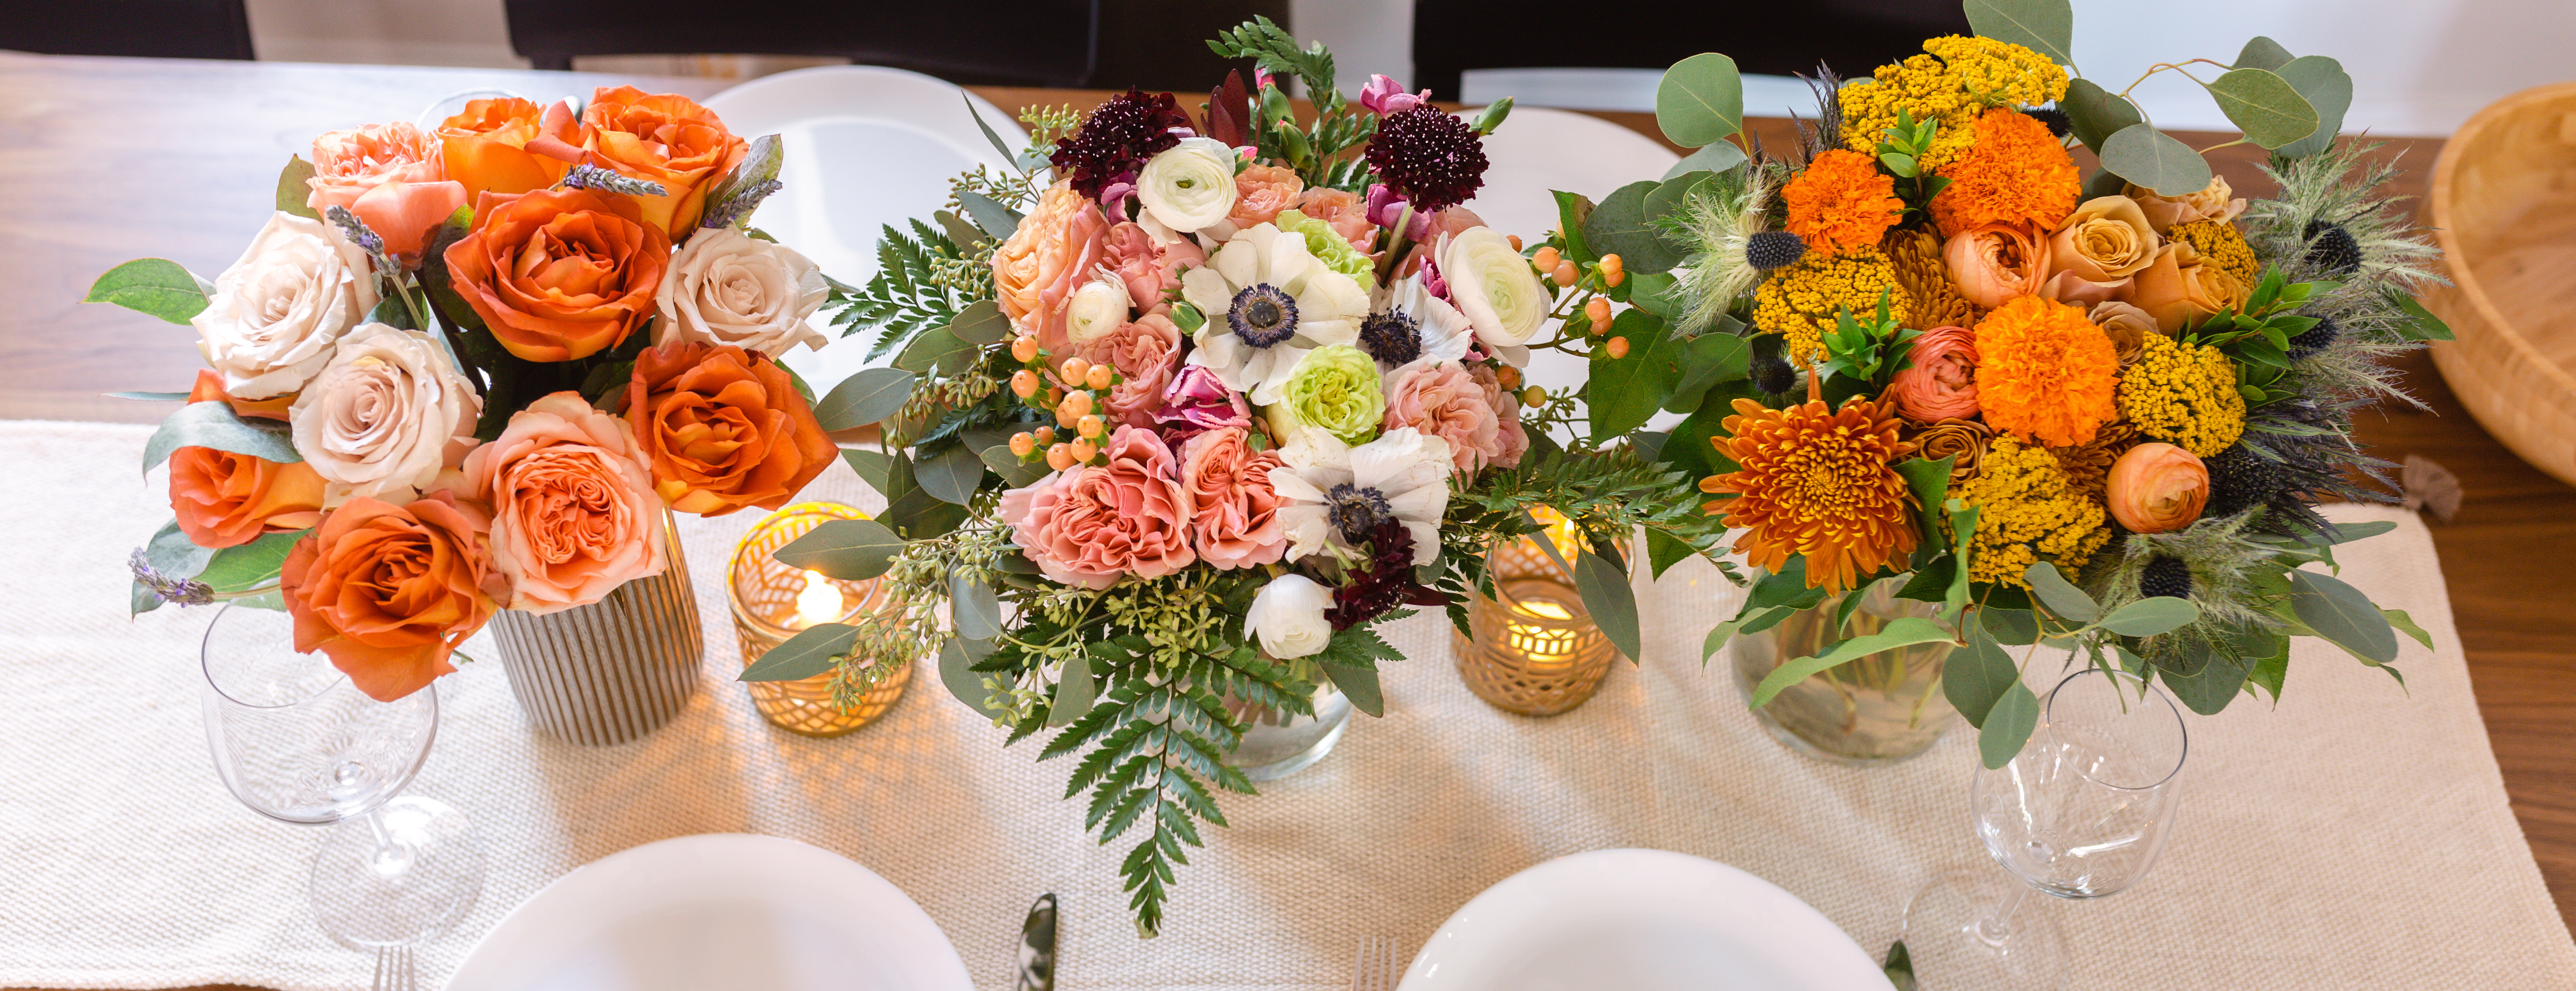 Tablescape with three summer bouquets.